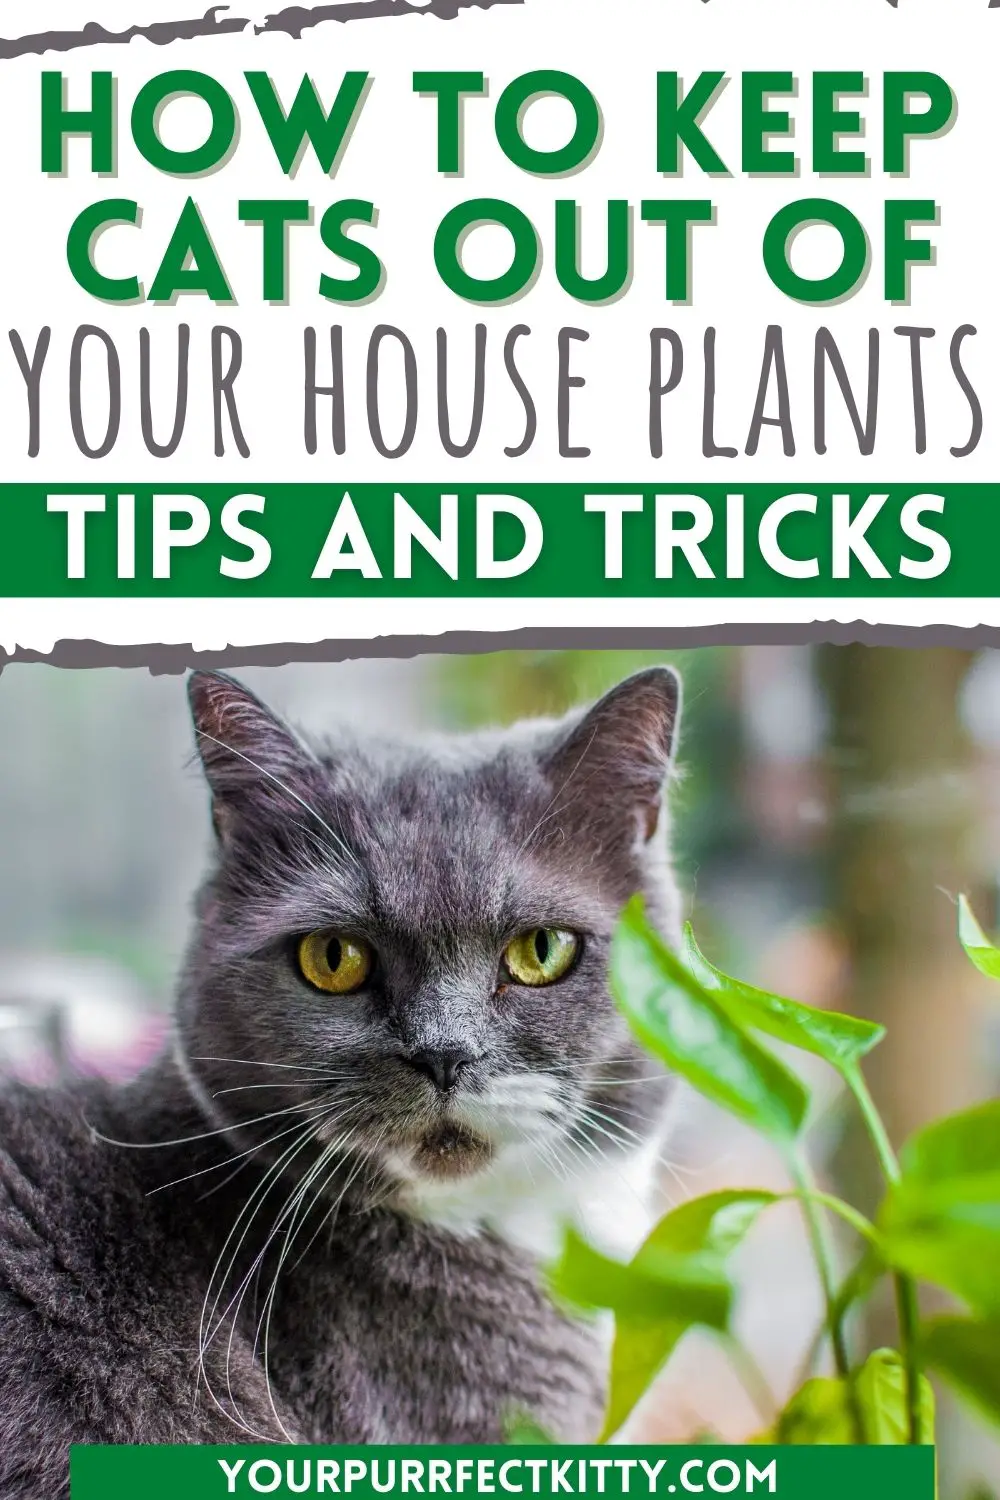 How to Keep Cats out of House Plants | Your Purrfect Kitty